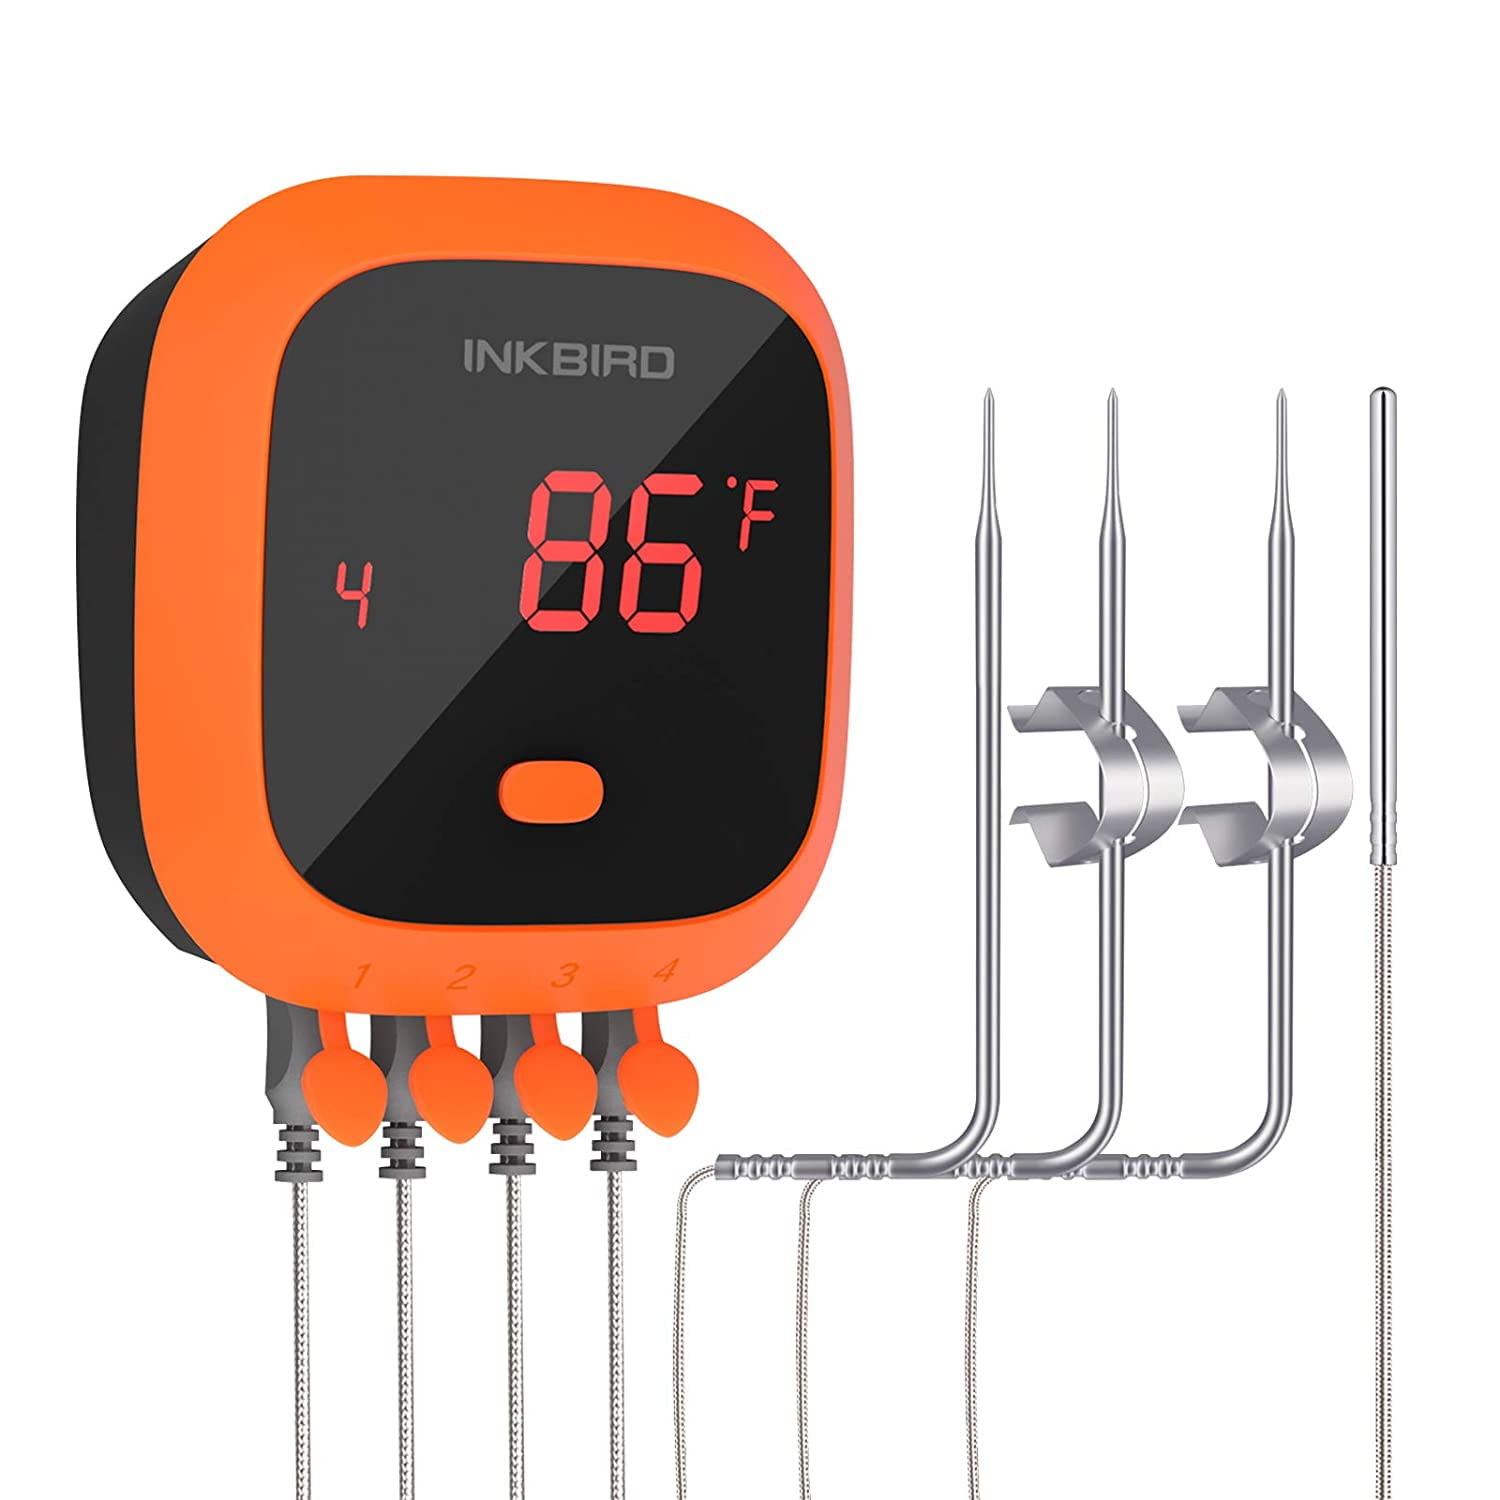 Inkbird WIFI Digital Cooking Thermometer 4PROBES Meat Timer Kitchen Rechargeable